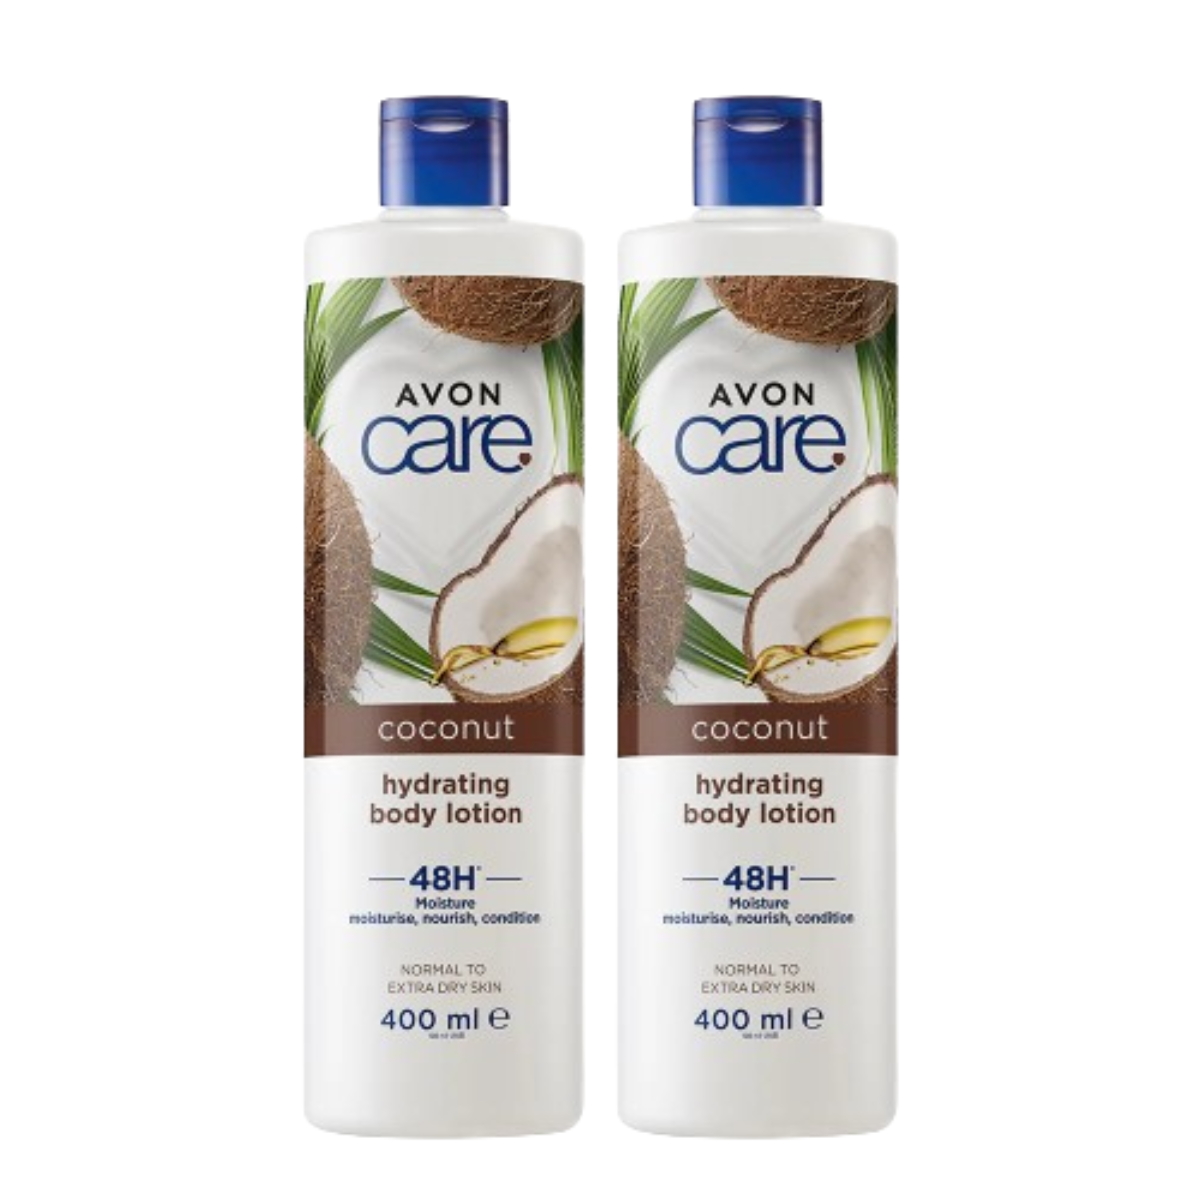 Avon Care Coconut Hydrating Body Lotion 400ml Pack of 2